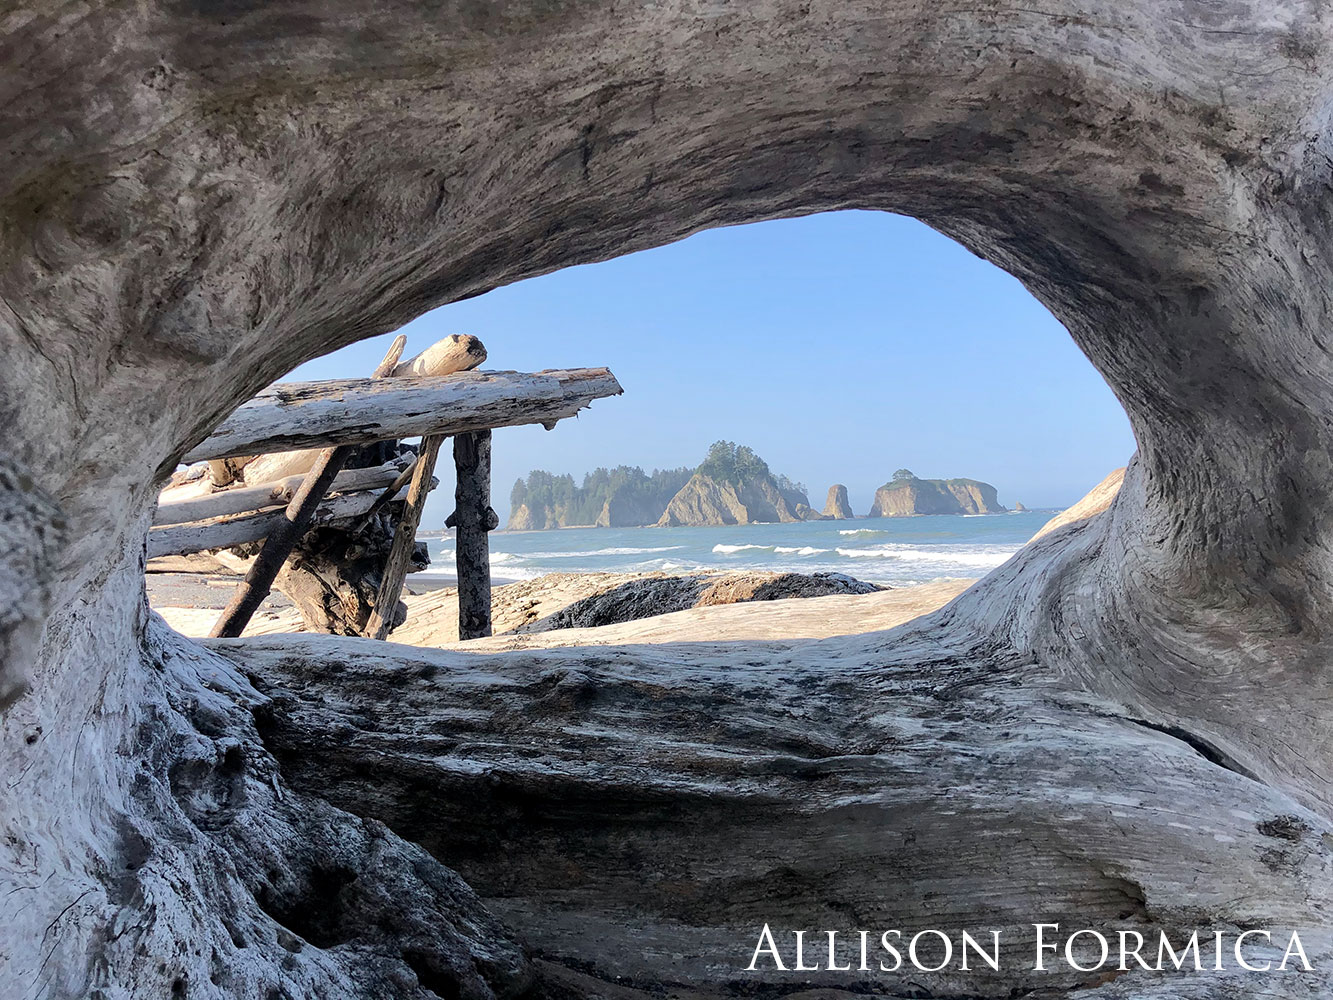 Distant islands through a driftwood frame. Photo is taken from inside a piece of driftwood on the beach.